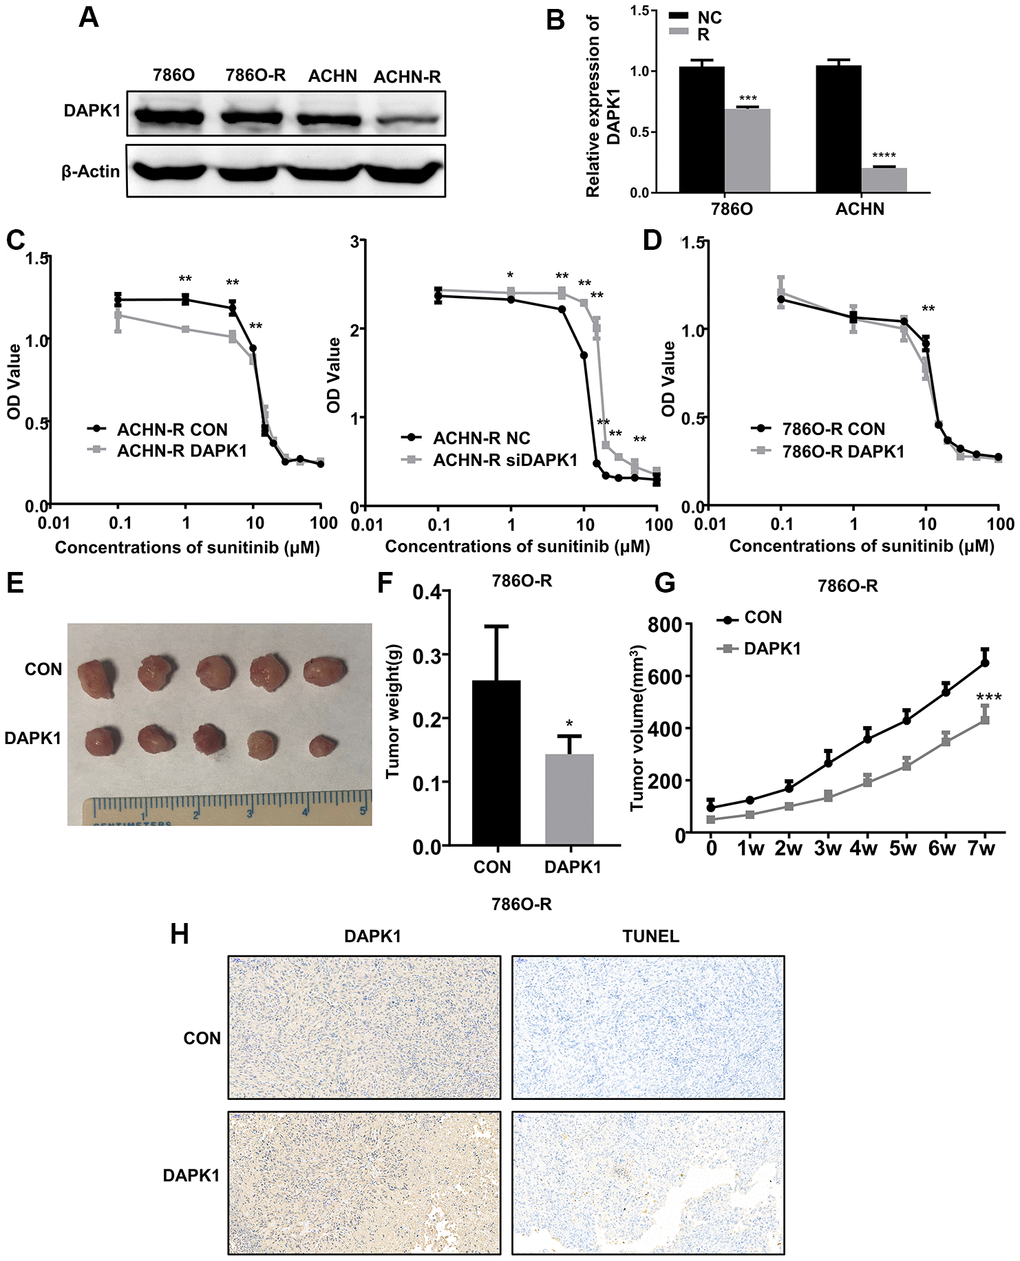 DAPK1 overexpression in the sunitinib-resistant ccRCC cells reduces the growth of xenograft tumors in the nude mice model. (A, B) Western blot analysis shows DAPK1 protein expression in parental (786-O and ACHN) and sunitinib-resistant (786O-R and ACHN-R) ccRCC cells. GAPDH is used as internal control. (C) CCK-8 assay results show the growth rate of control-ACHN-R, DAPK1-overexpressing ACHN-R, and DAPK1-knockdown ACHN-R cells that are treated with different concentrations of sunitinib. (D) CCK-8 assay results show the growth rate of control and DAPK1 overexpressing 786O-R cells that are treated with different concentrations of sunitinib. The picture (E), average weight (F) and volume (G) of the tumors obtained after 7 weeks of transplanting control and DAPK1 overexpressing 786O-R cells in the nude mice. (H) Immunohistochemical analysis of the xenograft tumors obtained by subcutaneously transplanting control and DAPK1 overexpressing 786O-R cells in nude mice. The bar graphs show the statistical analysis of three independent experiments. Note: The data are shown as means ± SEM. ***p